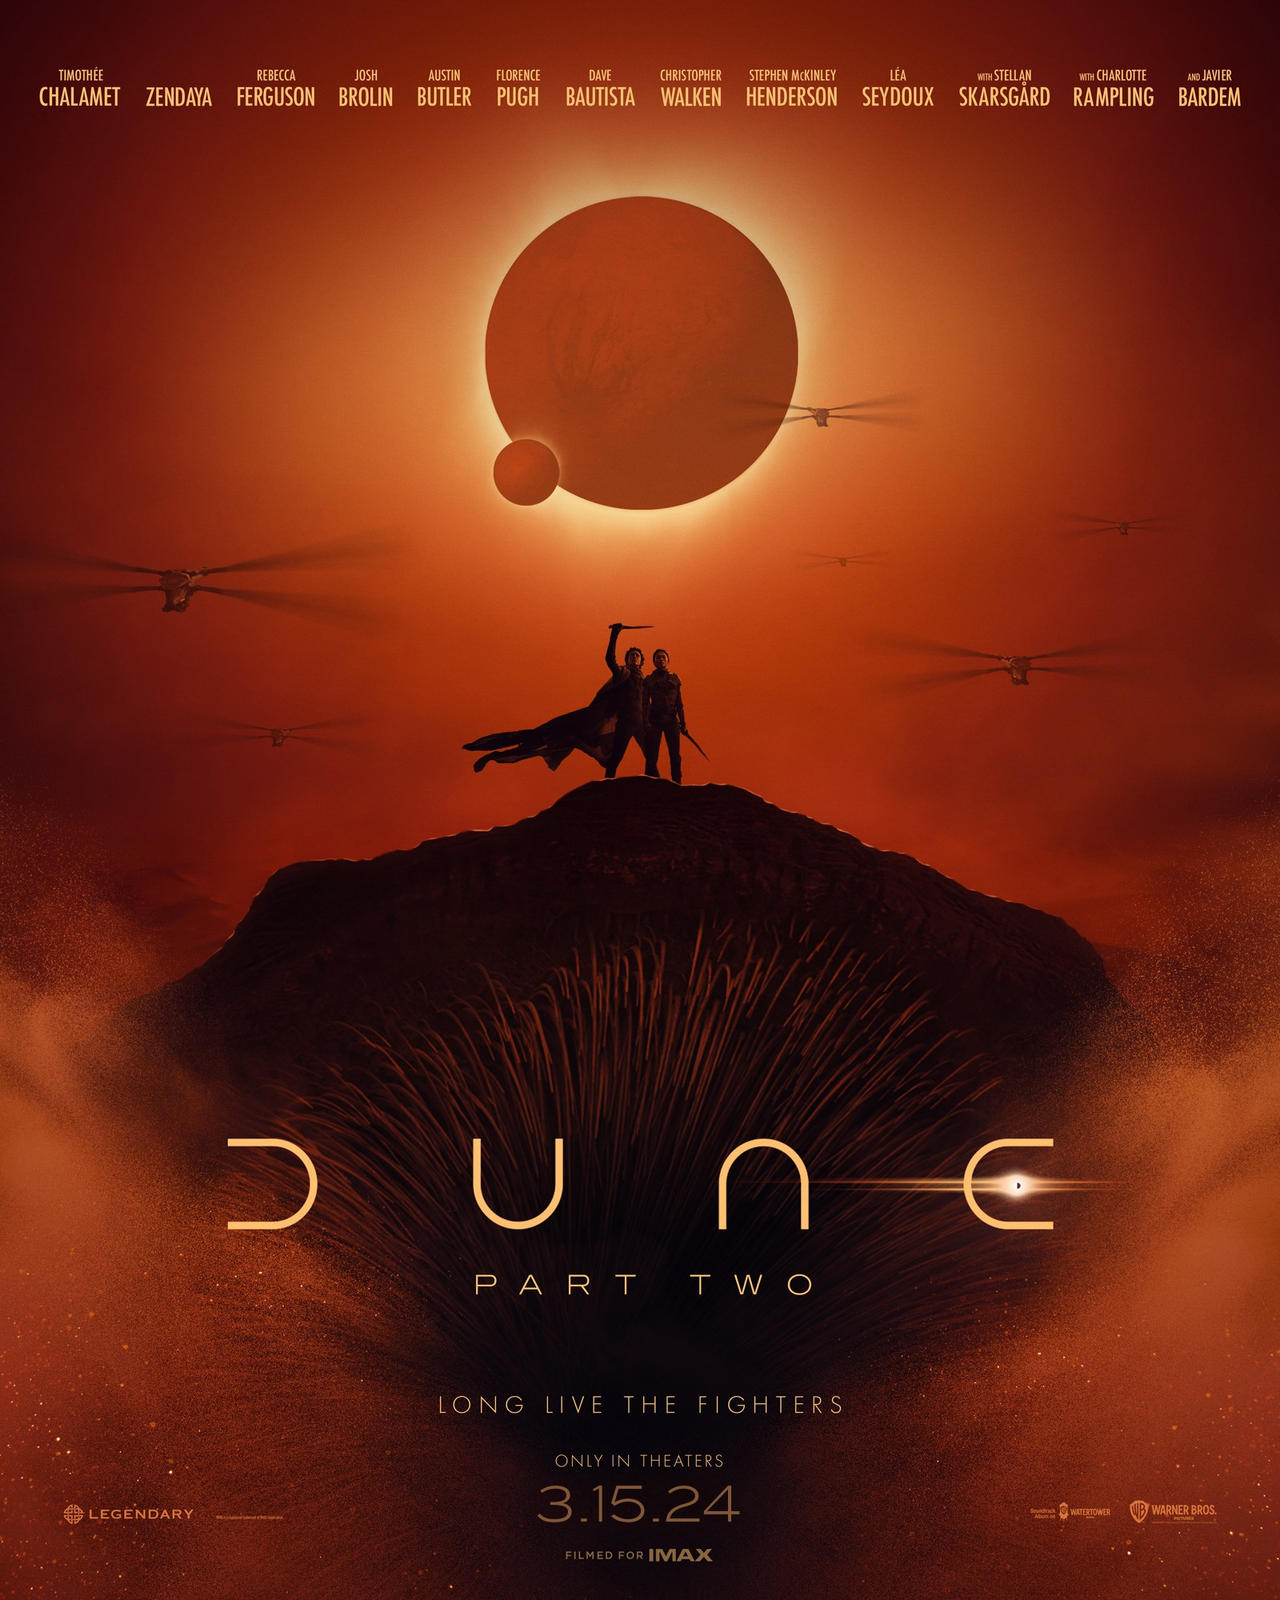 dune__part_two_poster_2__updated_release_date__by_paramountj_dg6v4iy-fullview.jpg